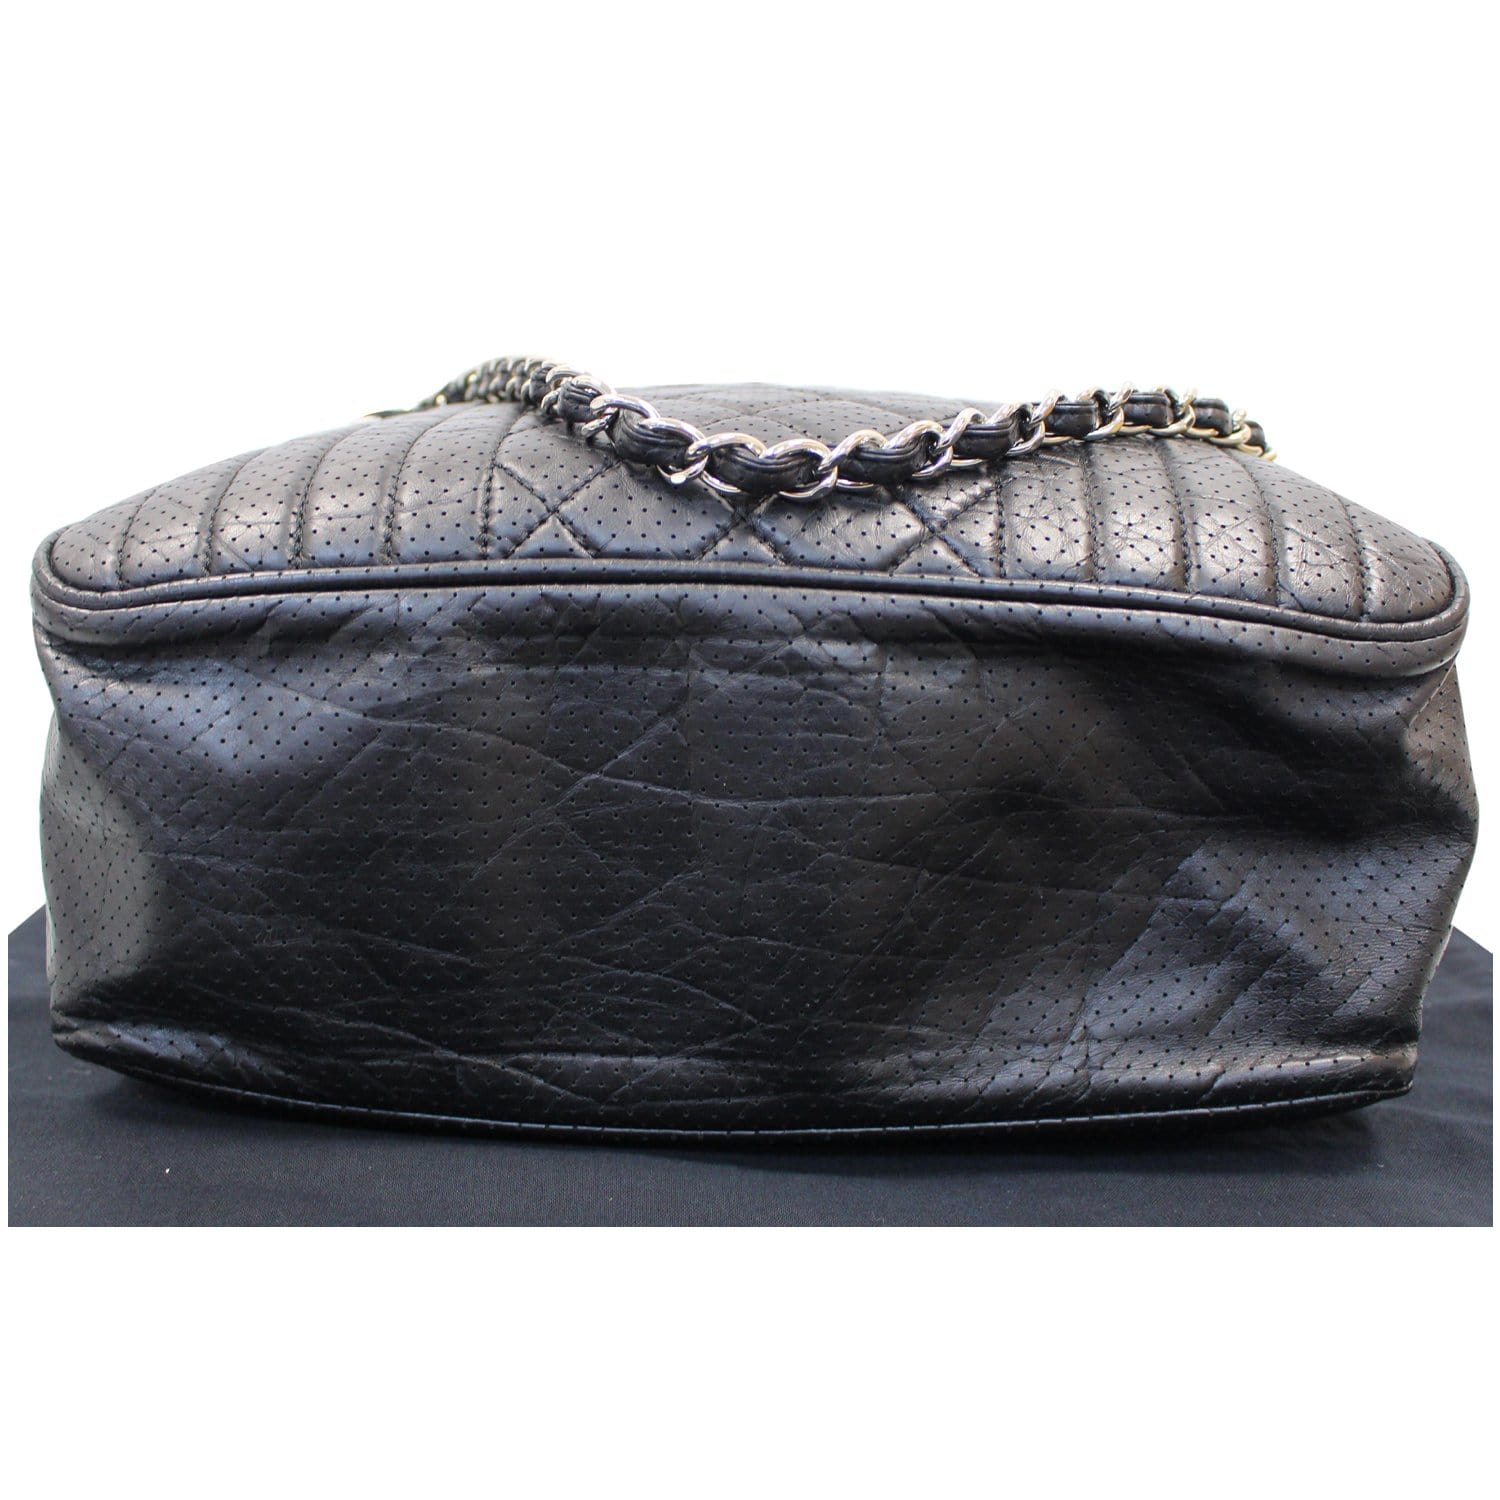 PRICE REDUCED! AUTHENTIC Chanel Black Leather Bubble Quilted Bowler Bag